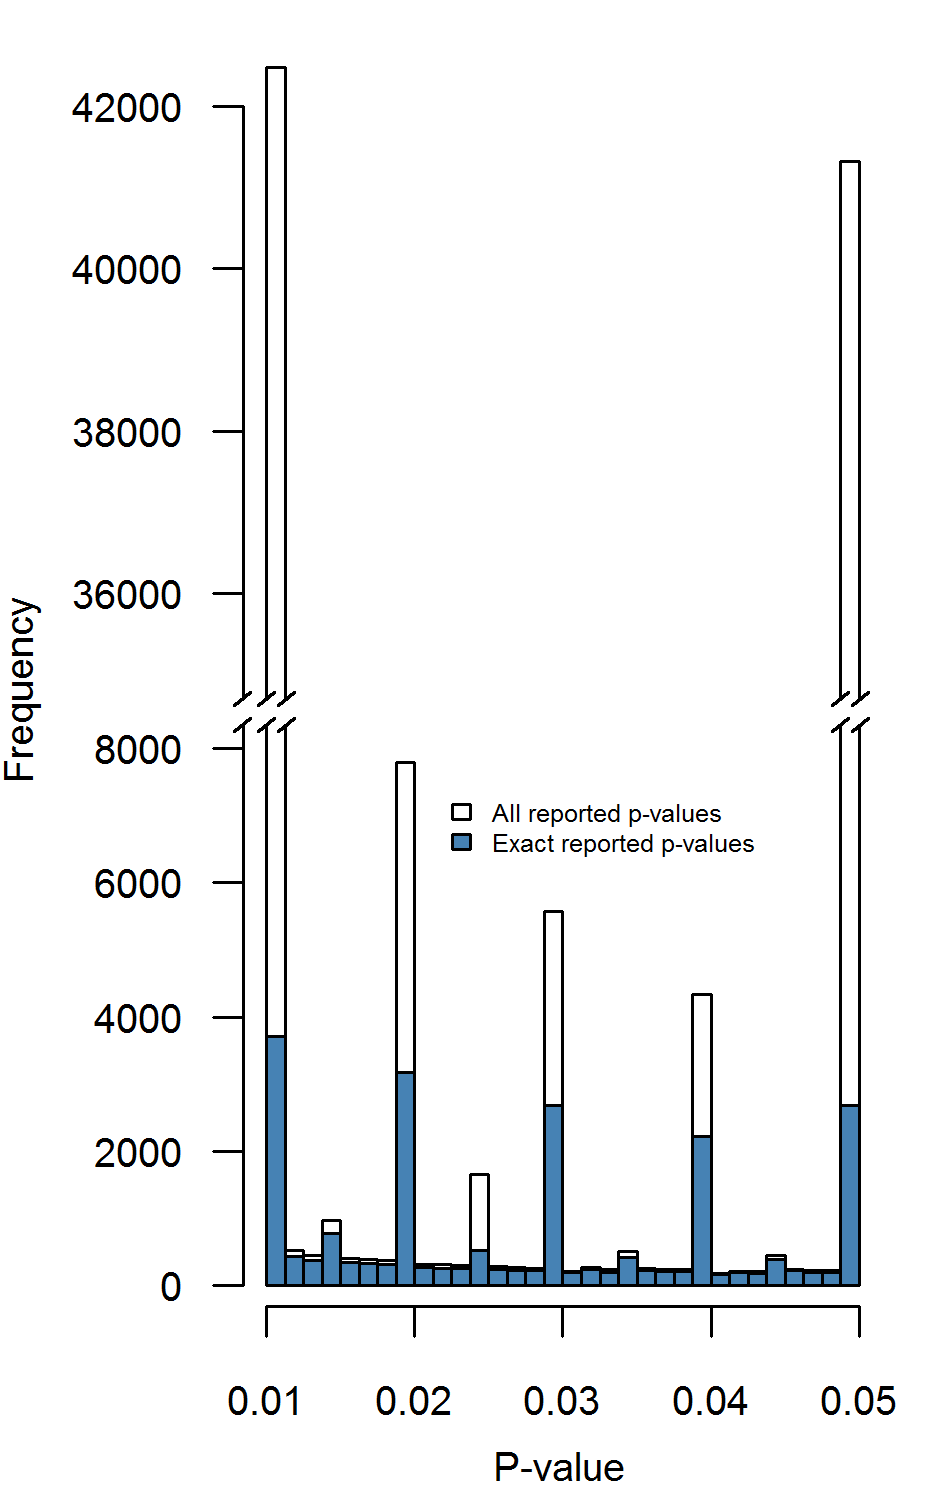 Distributions of all reported $p$-values (white) and exactly reported $p$-values (blue) across eight psychology journals. Binwidth = .00125.